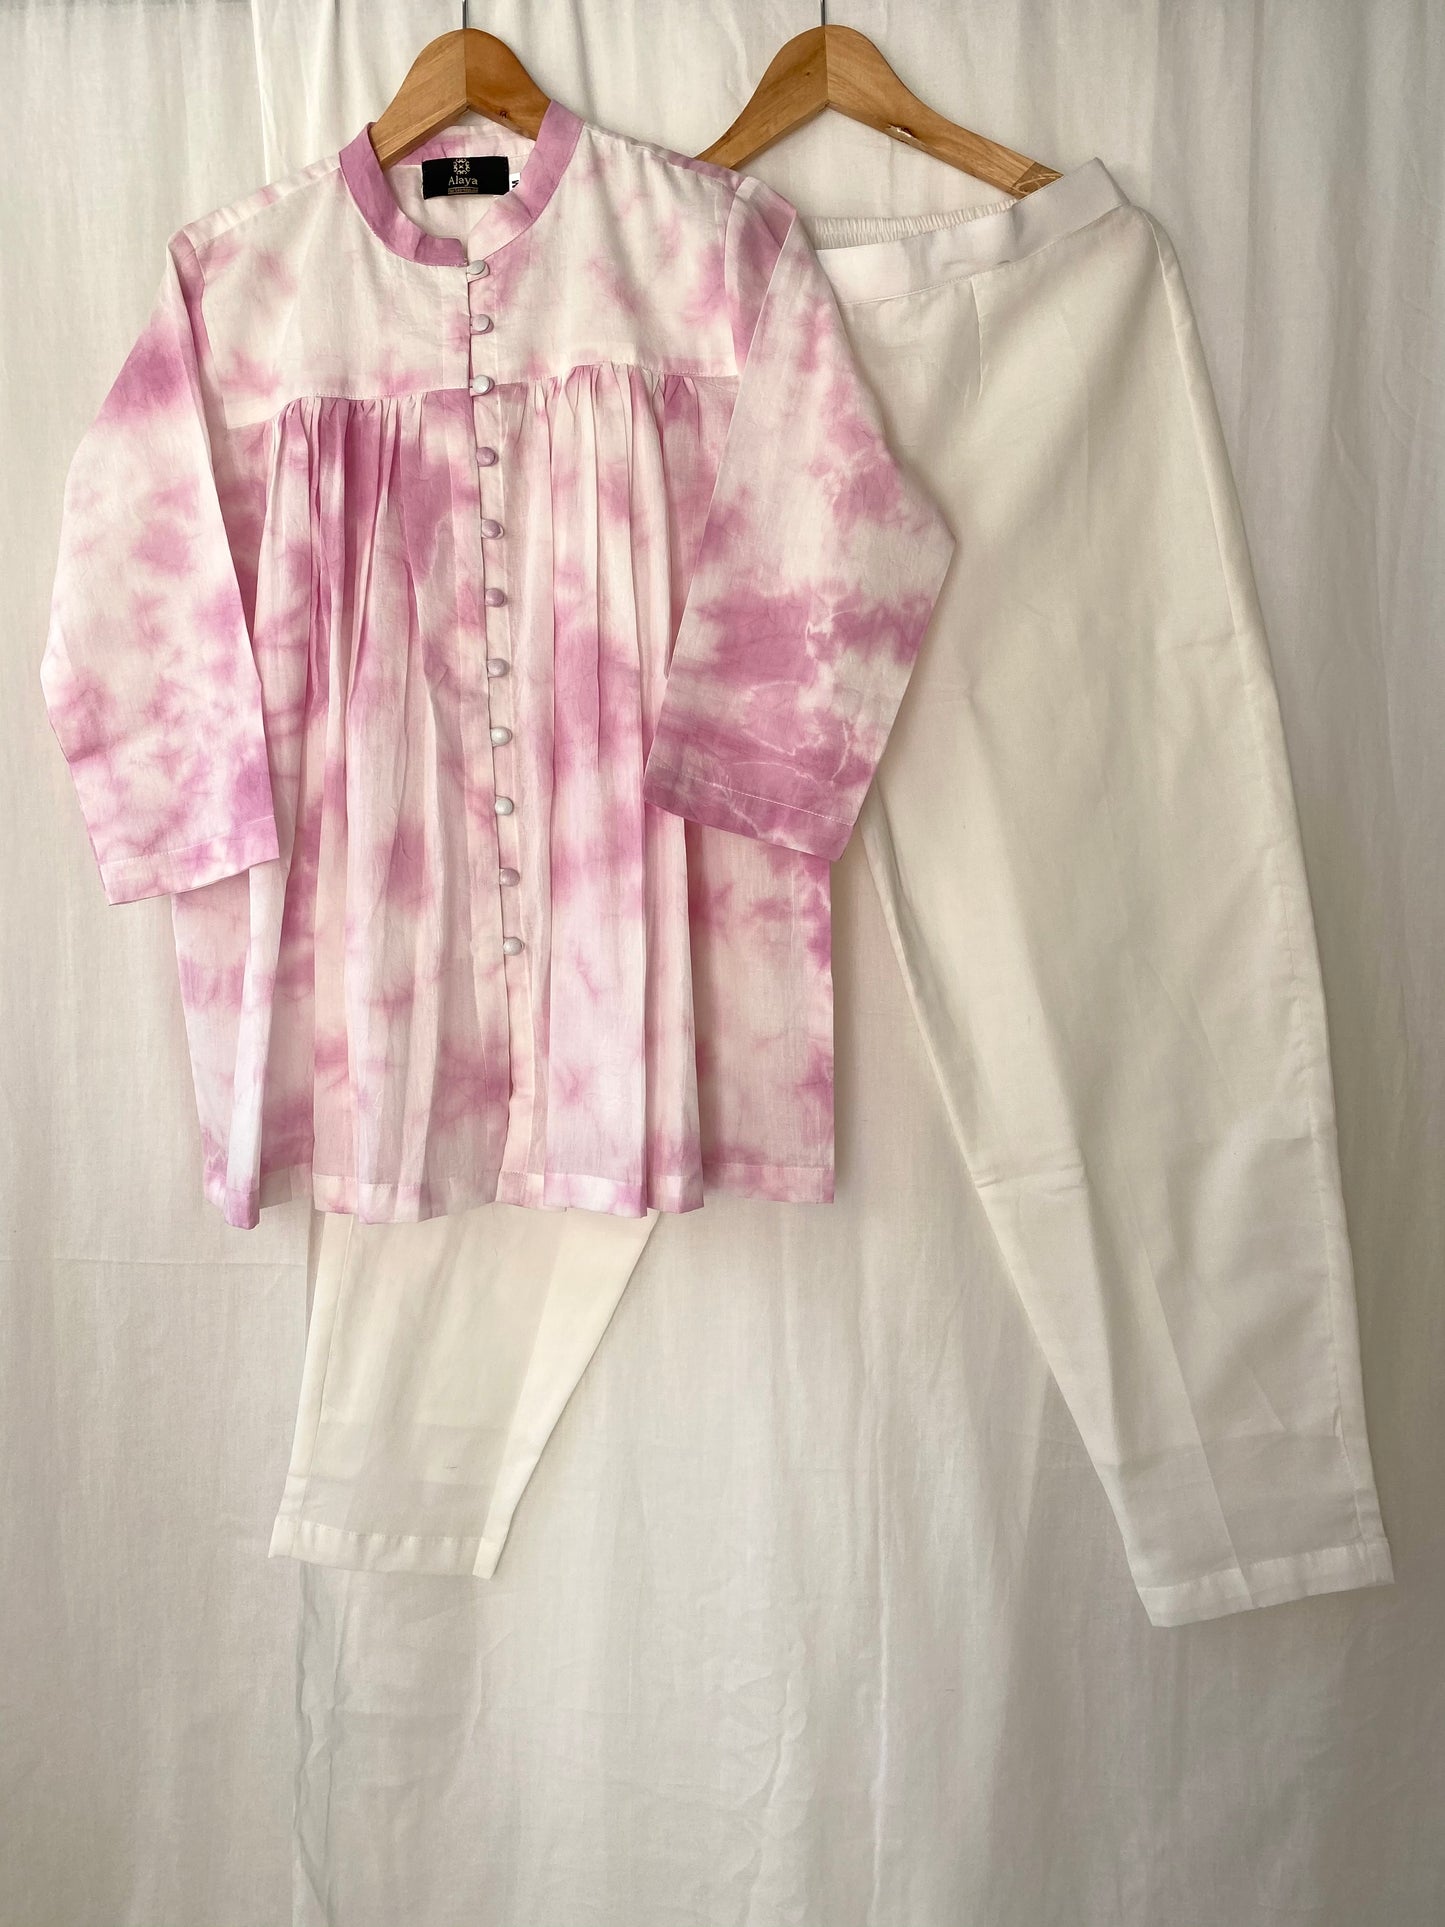 Lavender Tie Dye Top with solid White Pants